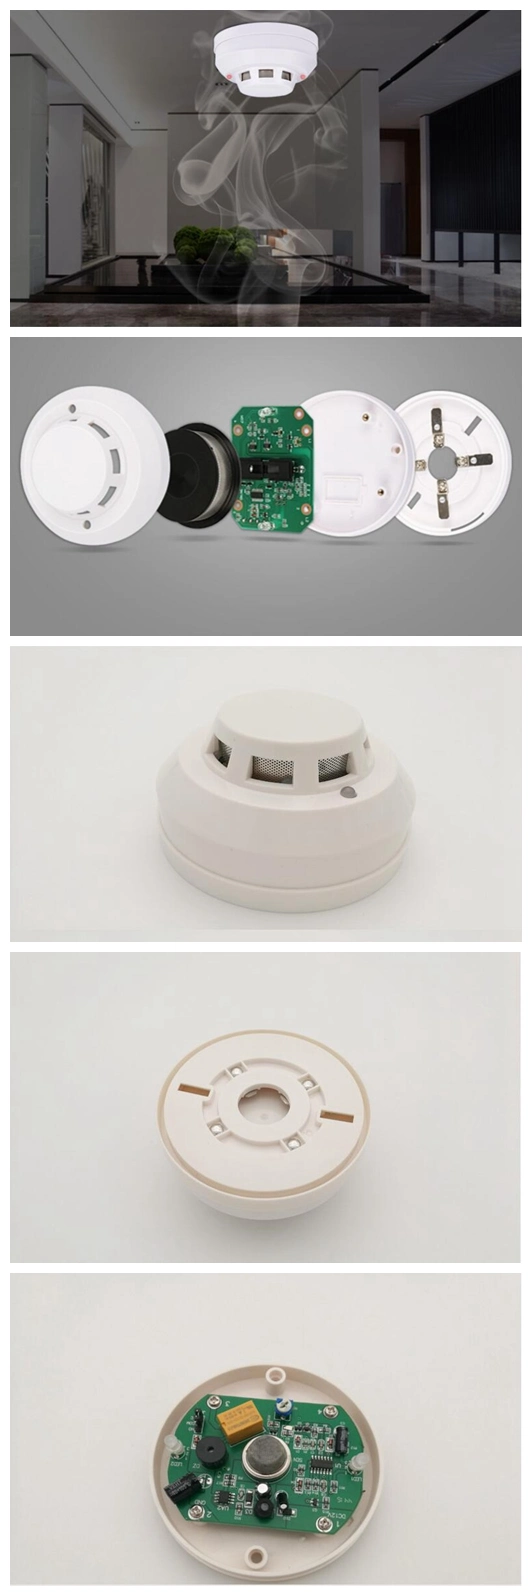 Wholesale 4 Wire Conventional Optical Smoke and Fire Sensor/Detector